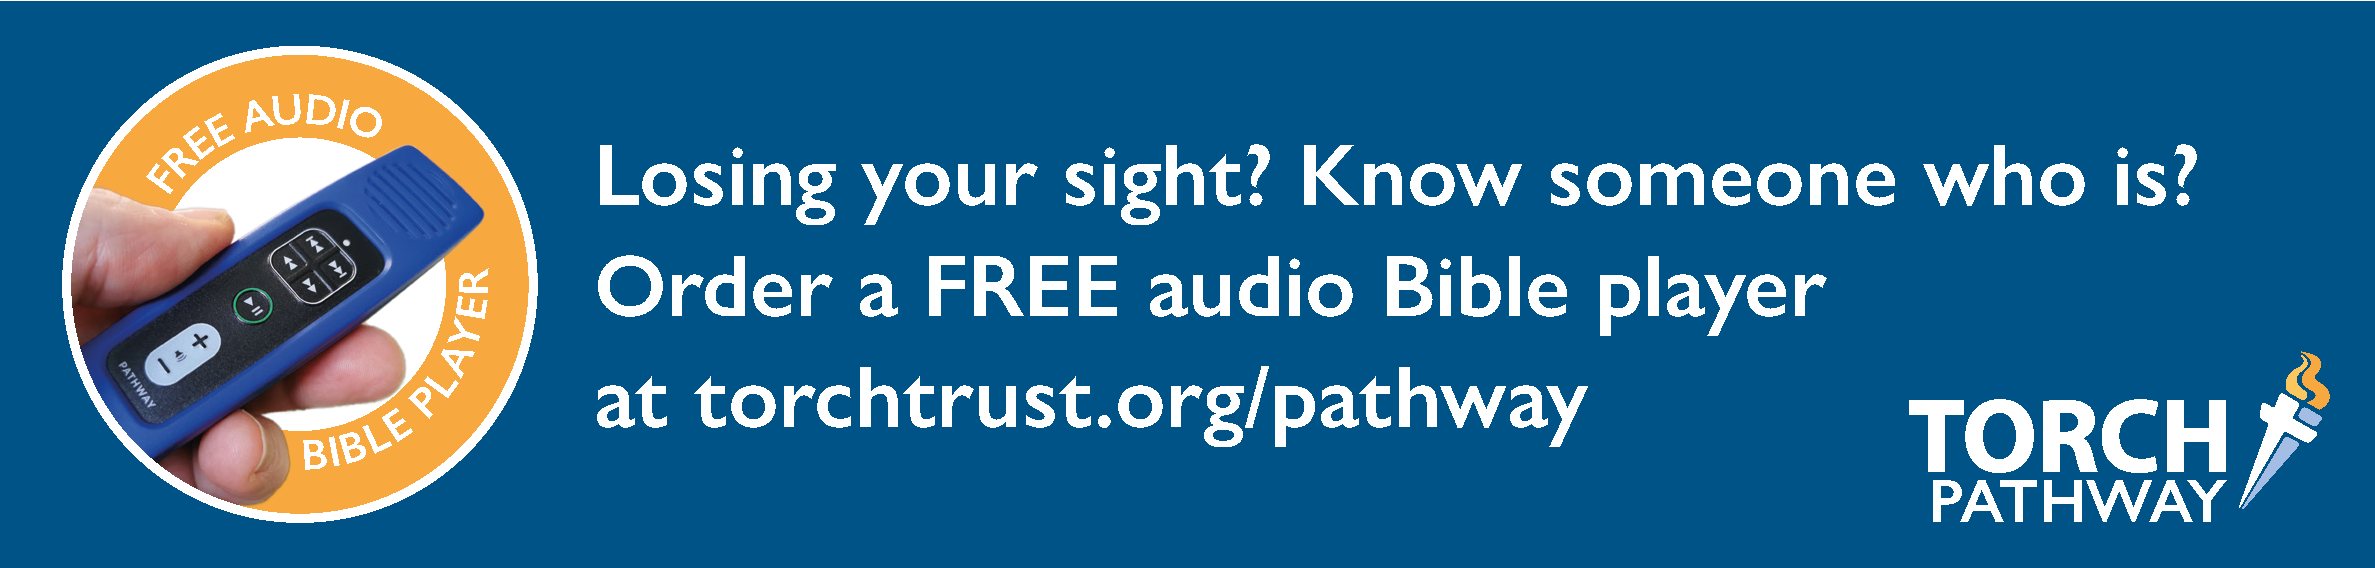 Losing your sight? Know someone who is? Order a FREE audio Bible player at torchtrust.org/pathway